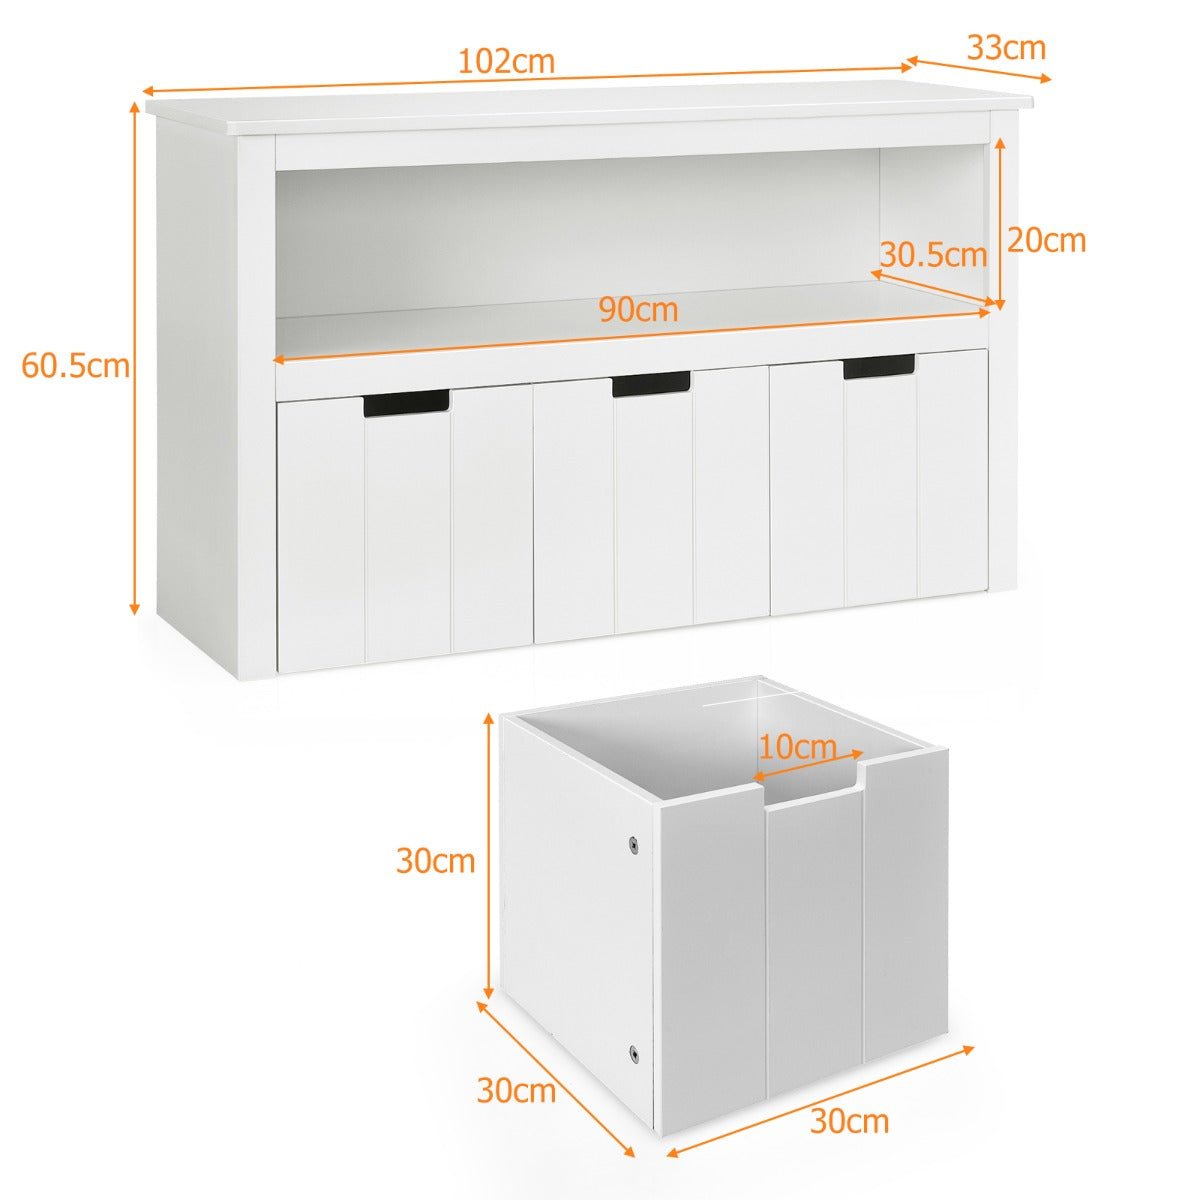 Toy Storage Organizer for Kids - 3 Drawers for Clutter-Free Space